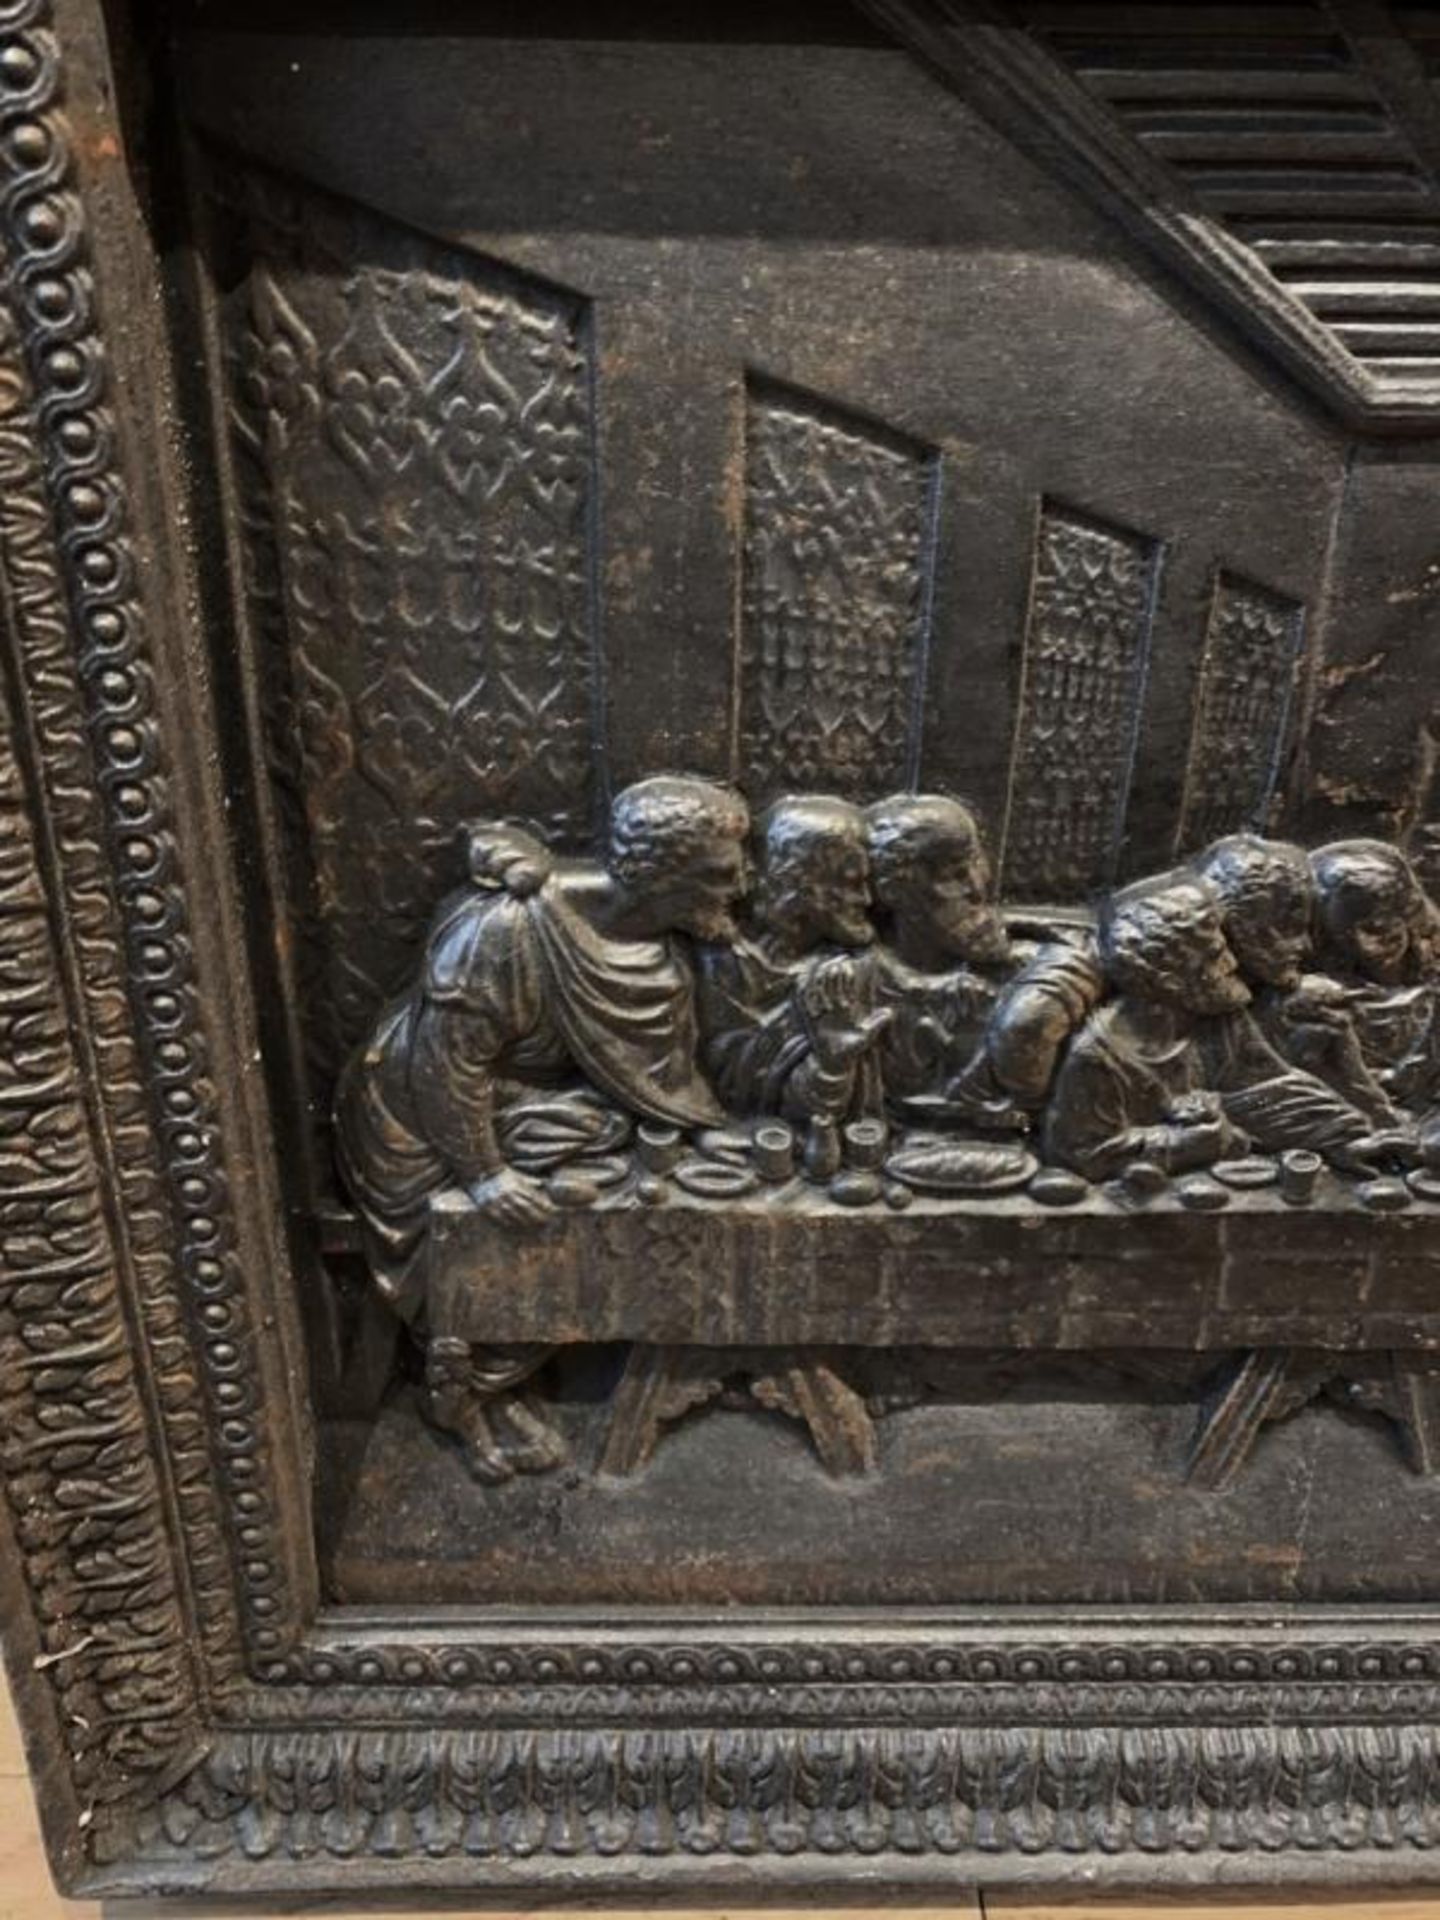 1 x Heavy Solid Cast Iron Rectangular Sculpture Featuring The Famous 'Last Supper' Scene - - Image 2 of 14